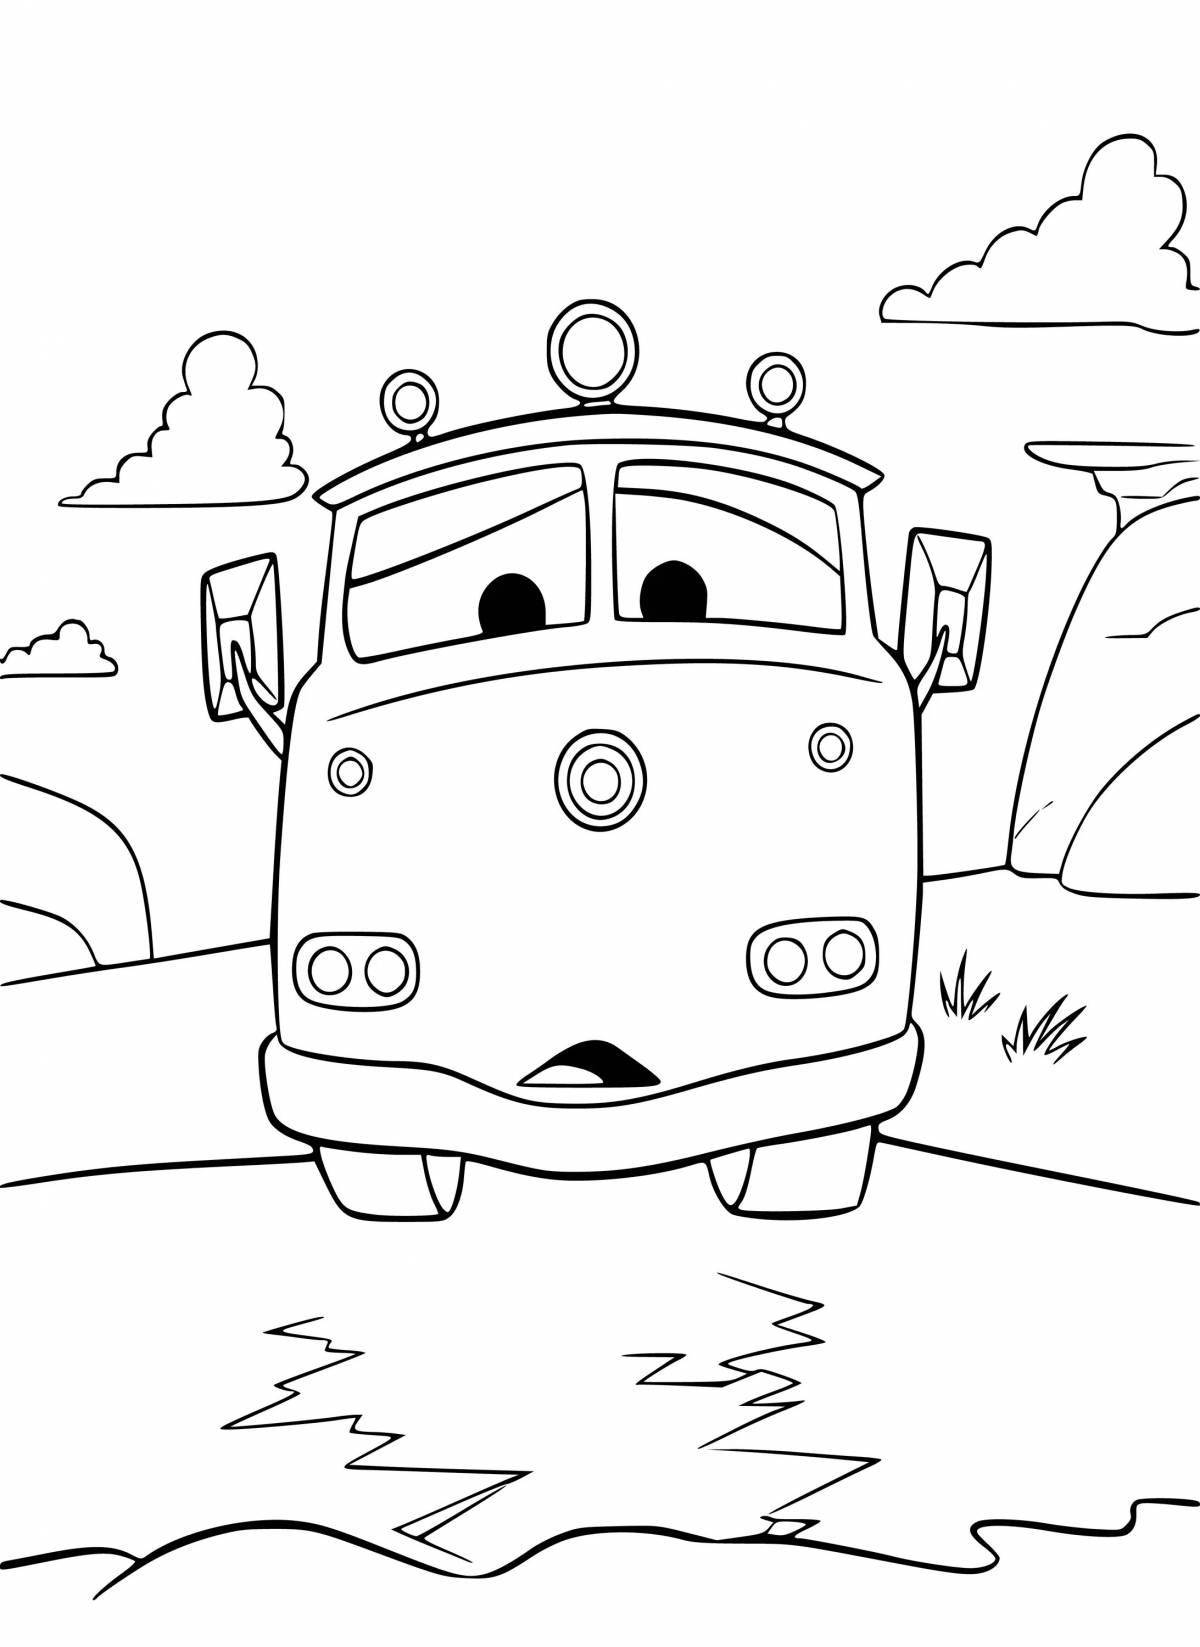 Coloring page wonderful cars and buses